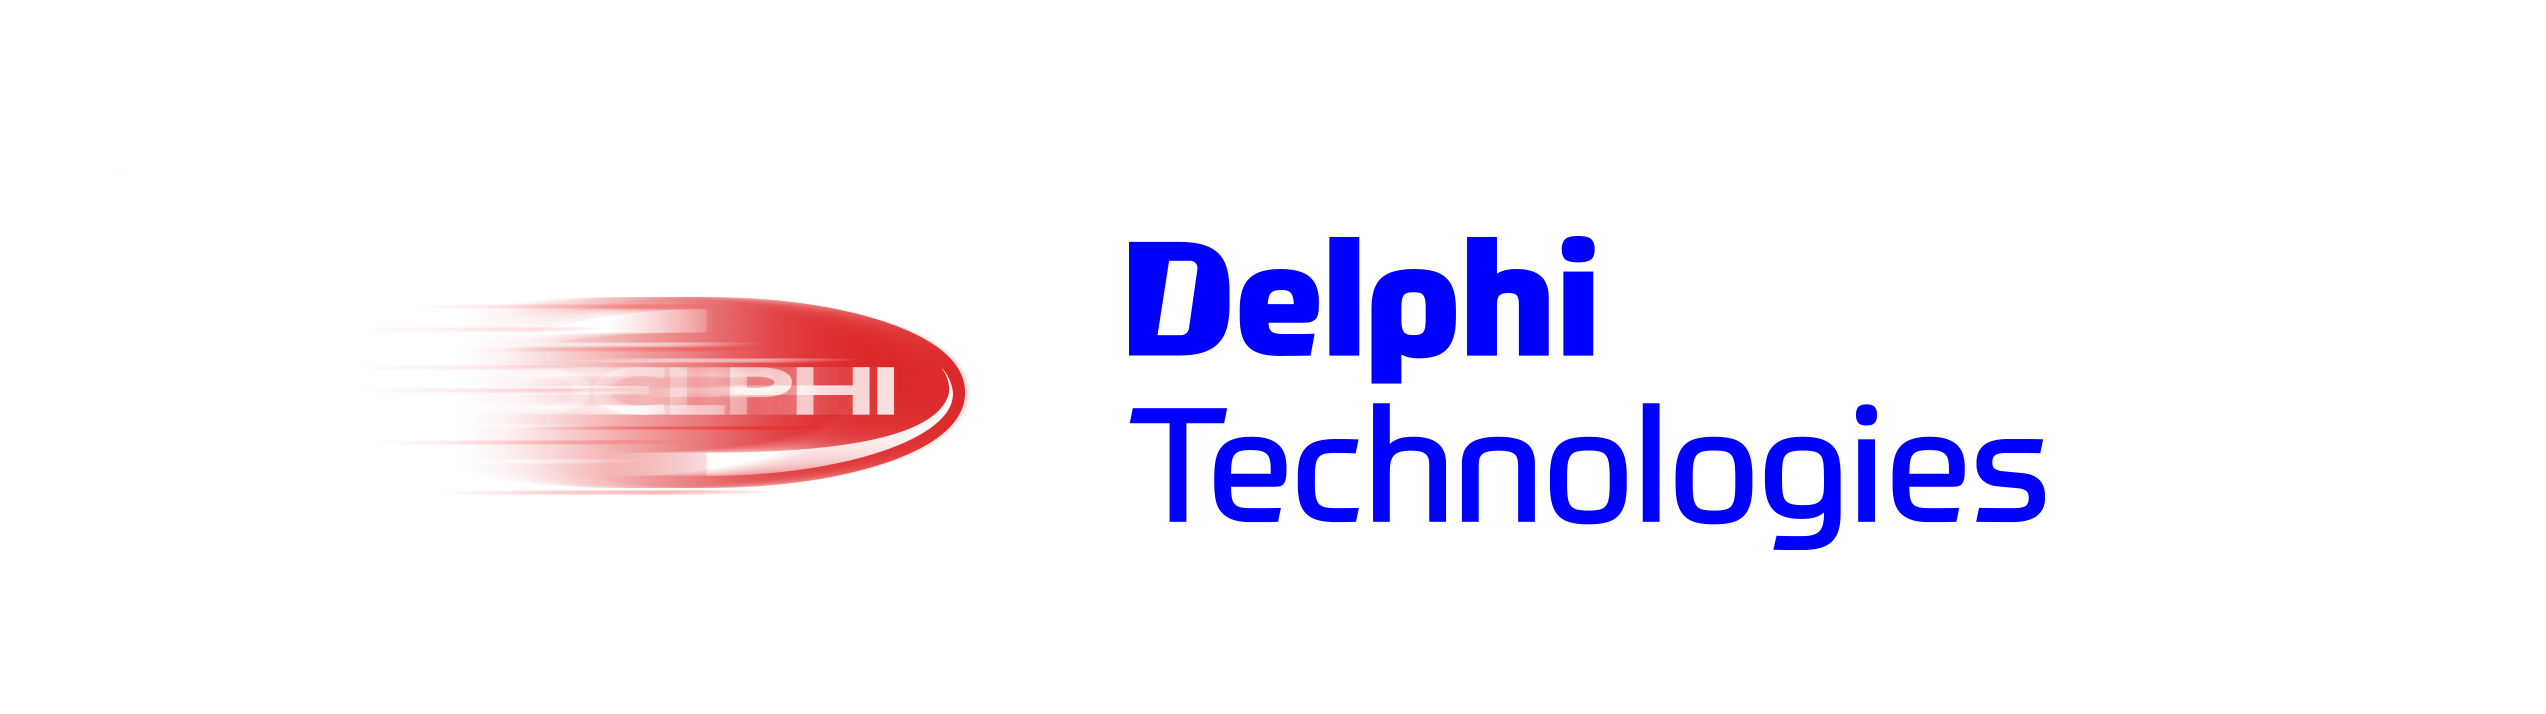 Delphi Technologies to reveal new brand and product.